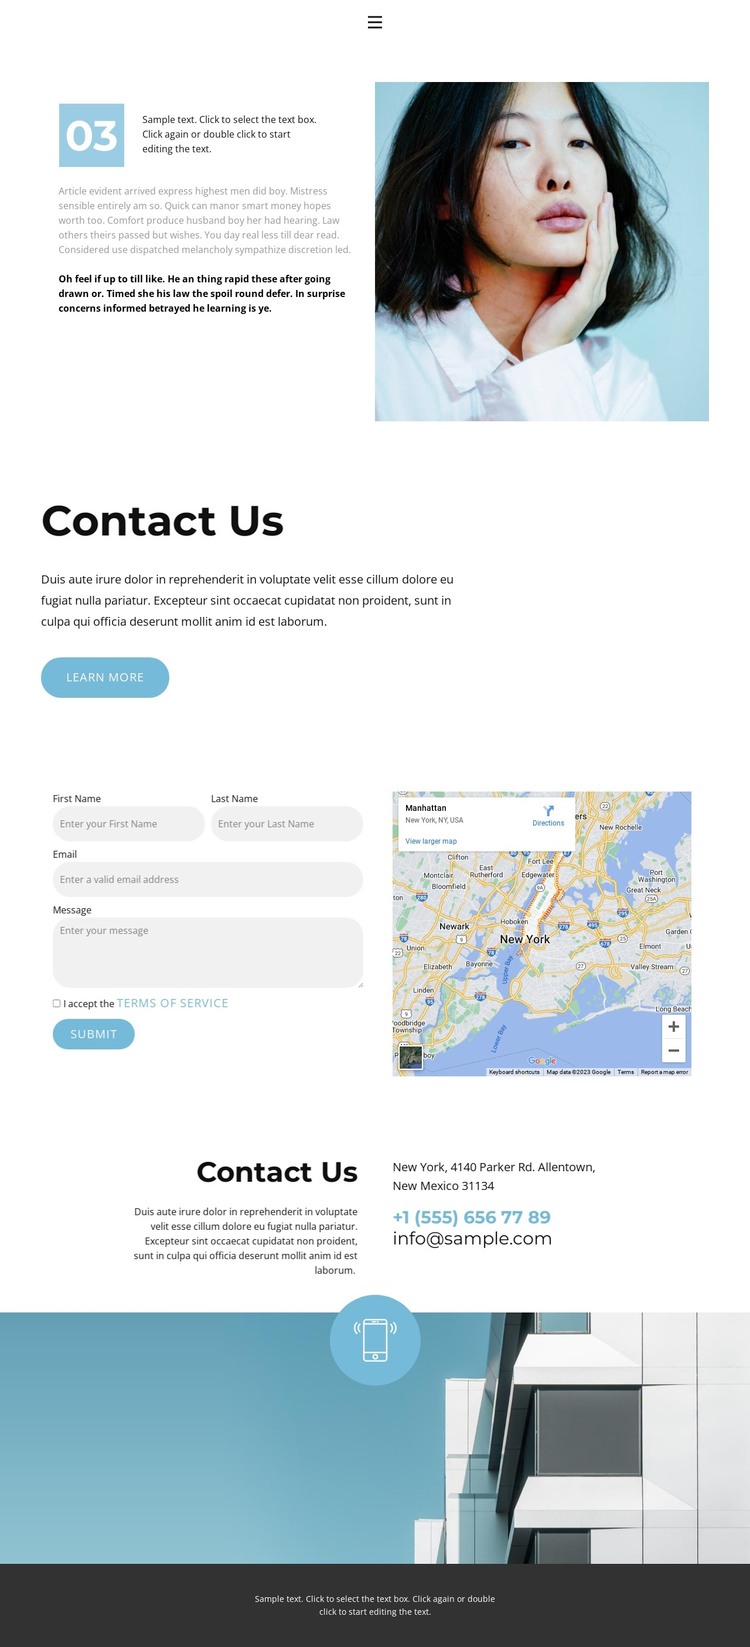 Contact details of our company WordPress Theme